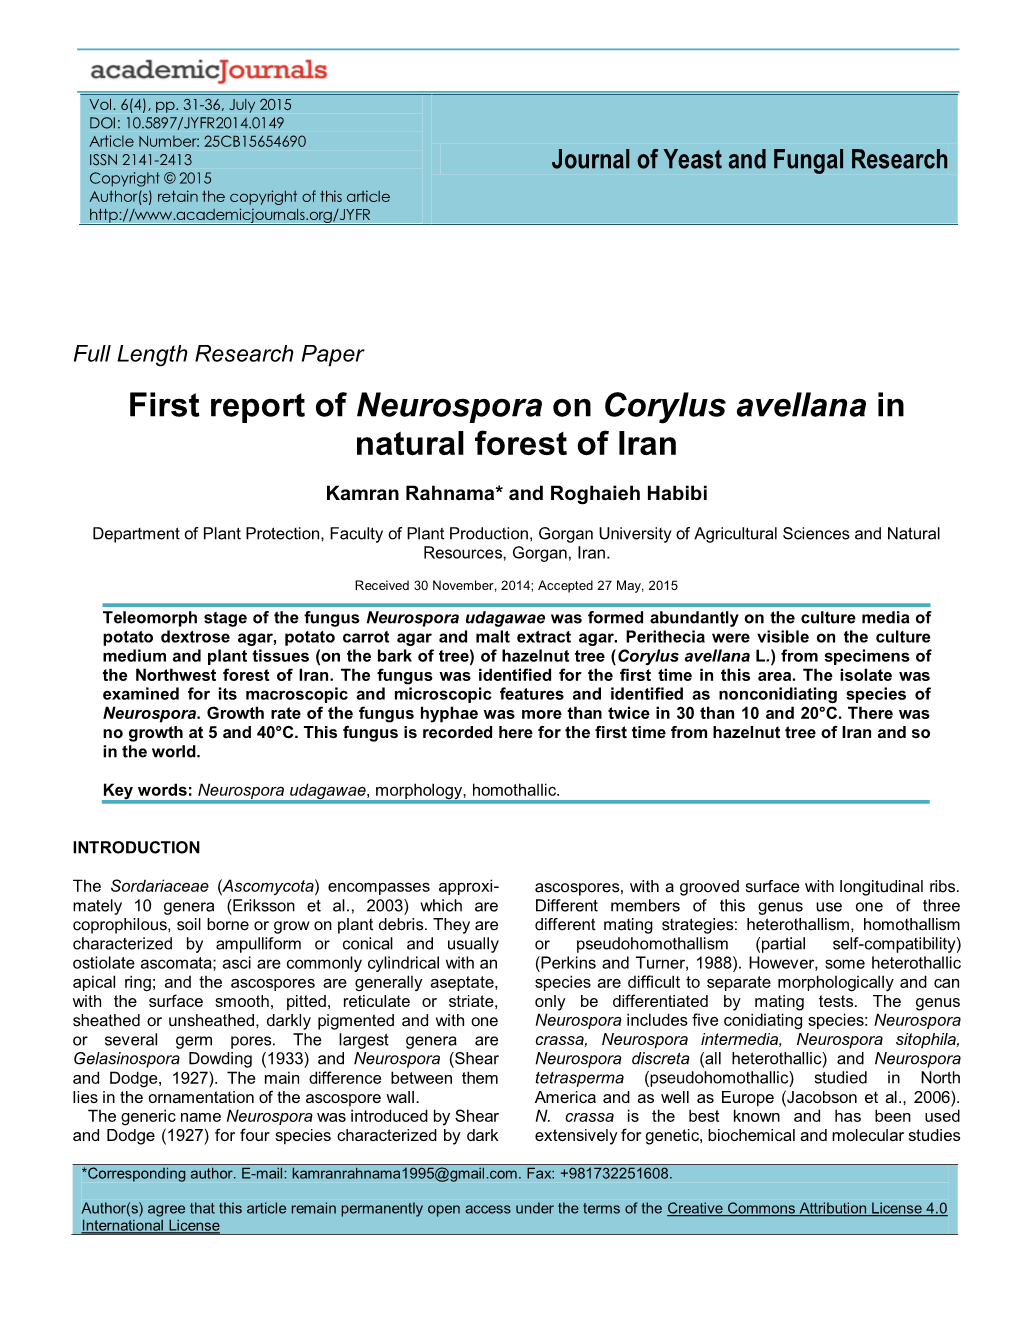 First Report of Neurospora on Corylus Avellana in Natural Forest of Iran